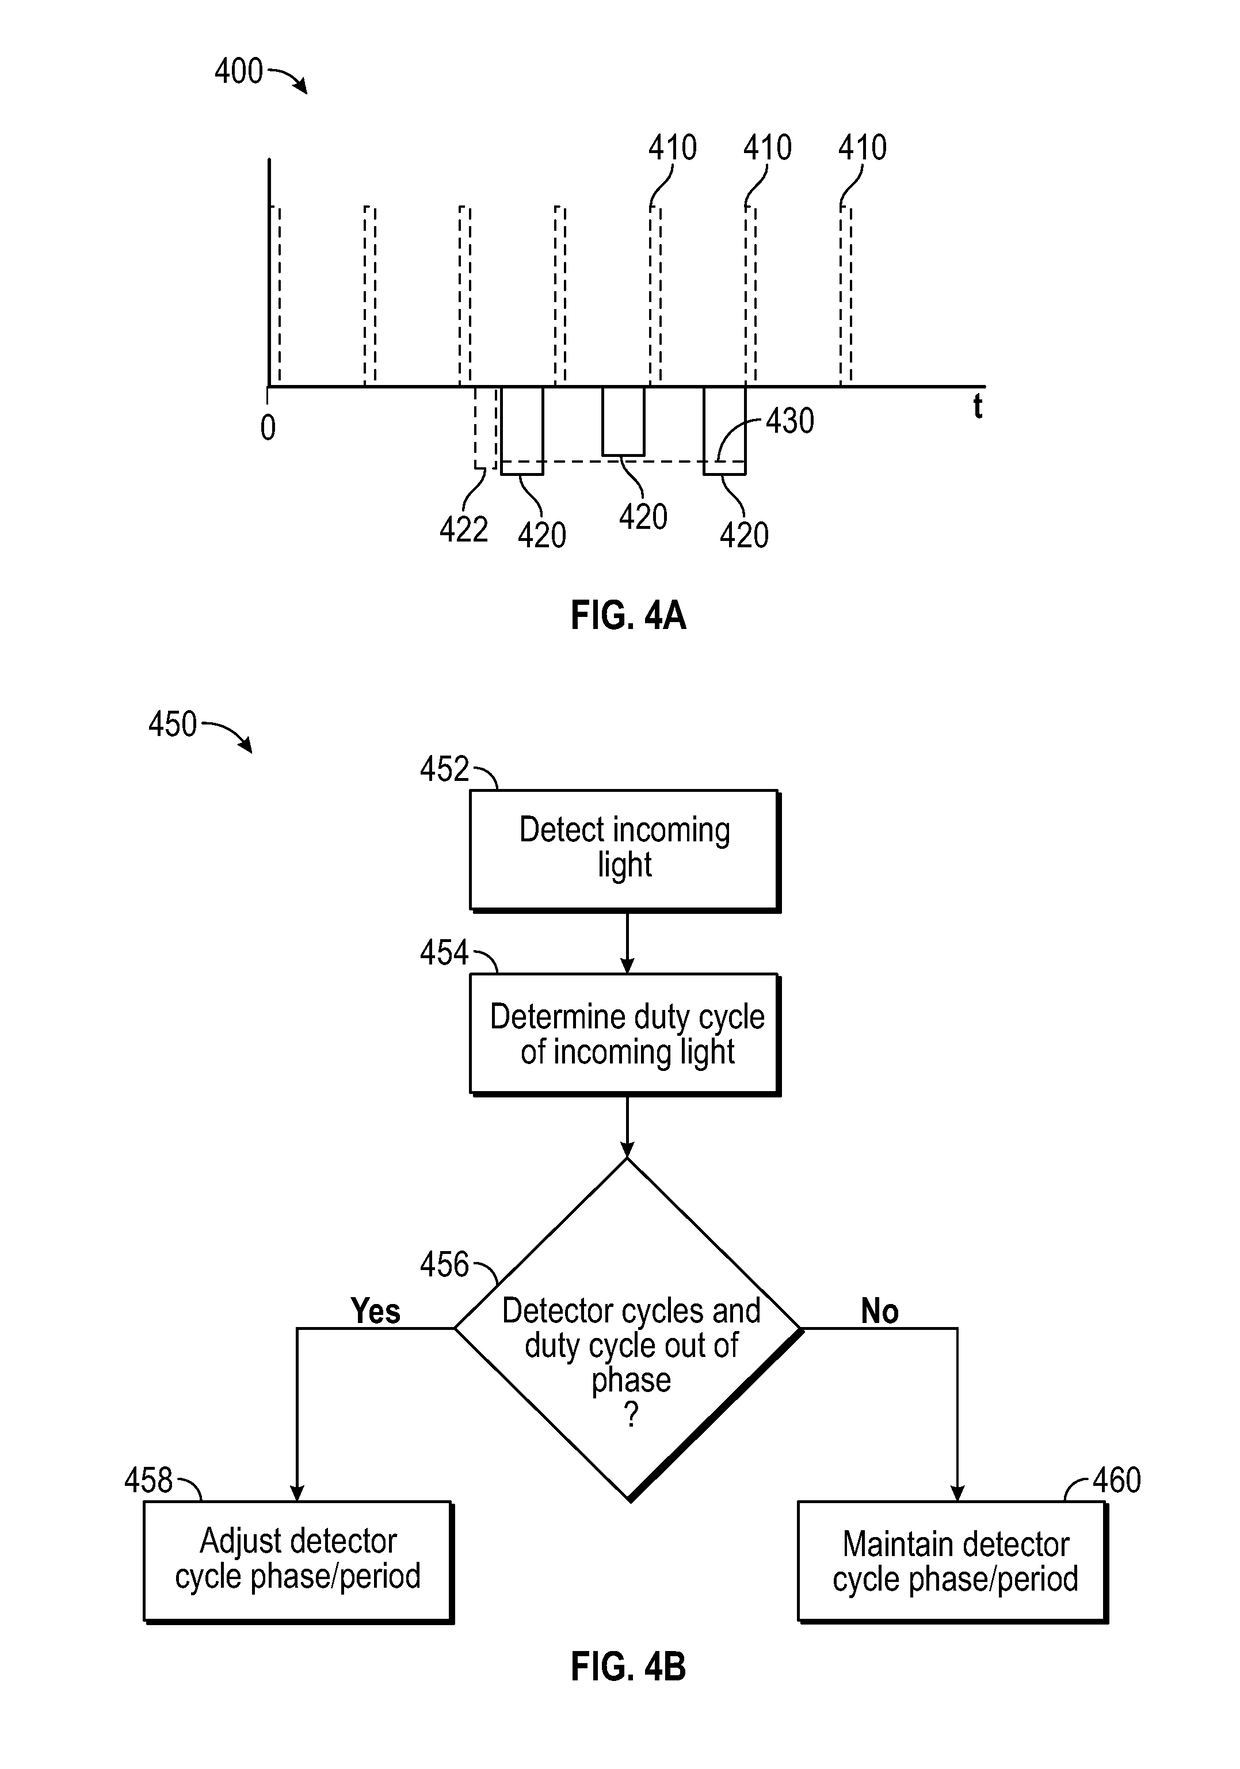 Controlling dimming of mirrors or displays using dual-function lighting